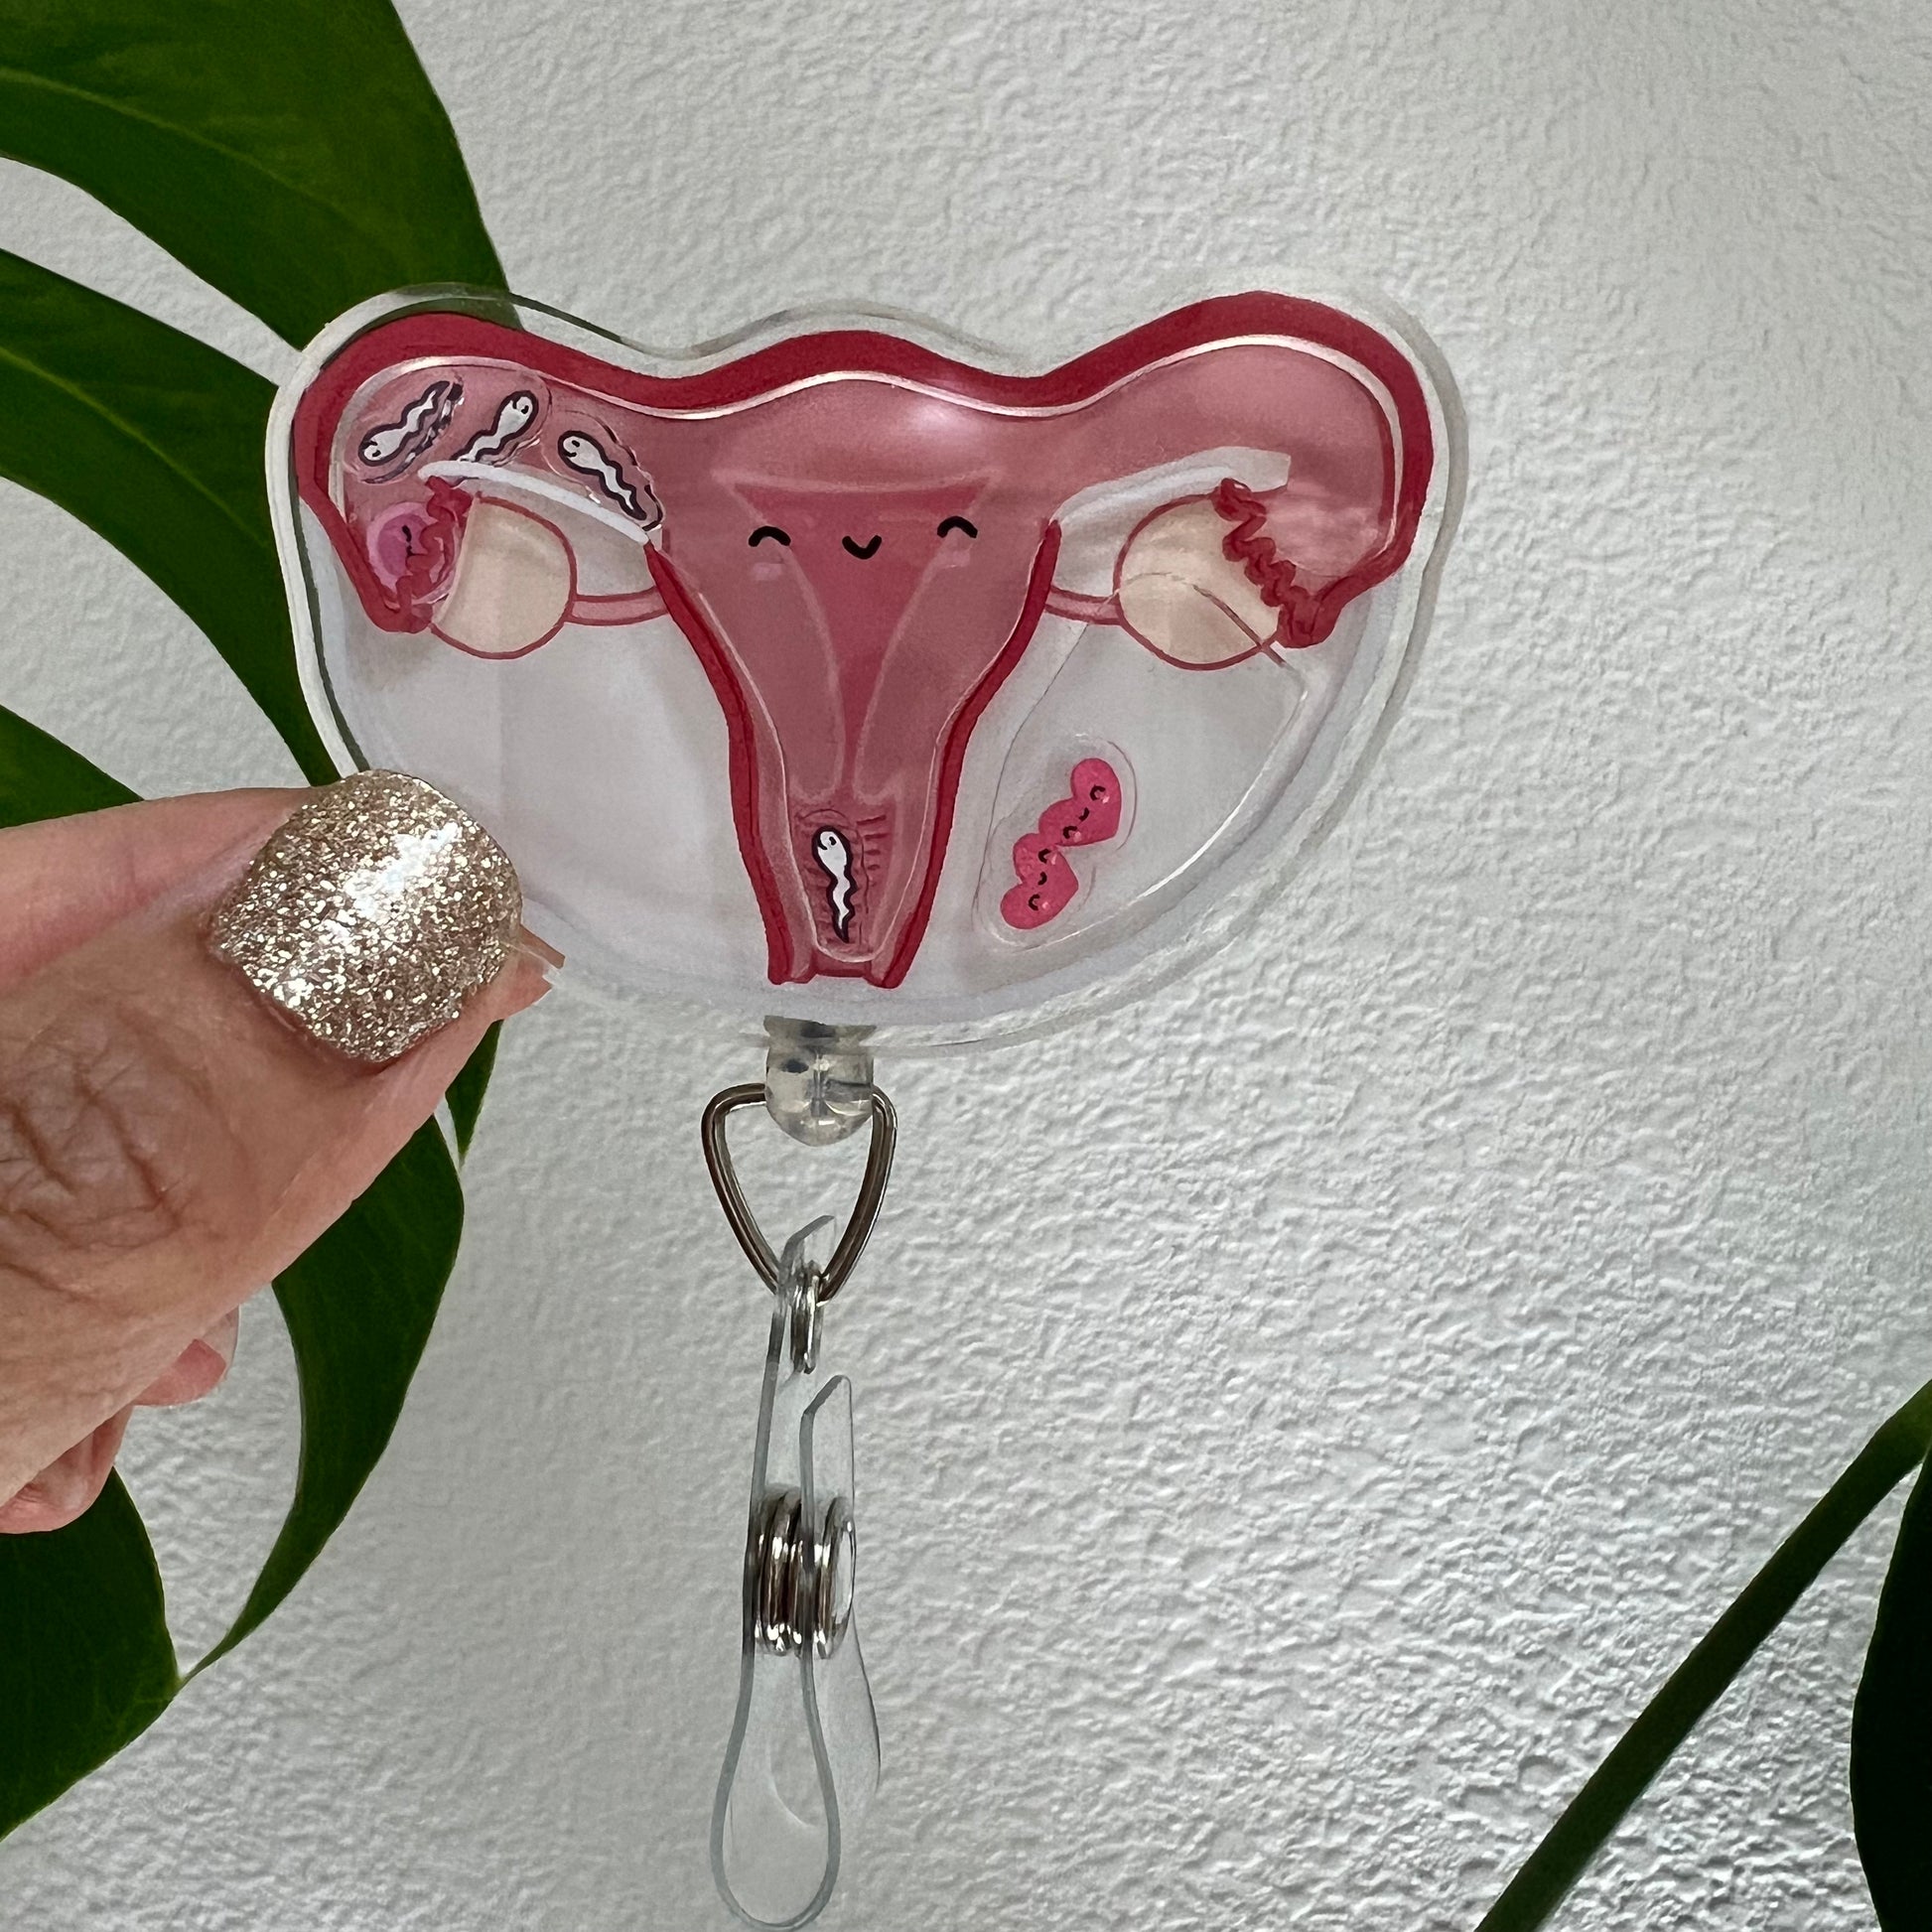 Uterus Badge Reel Uterus Badge uterus Reel Badge-obstetrician  Reel-obstetrician Badge-labor and Delivery Nurse Badge Obgyn Gift 